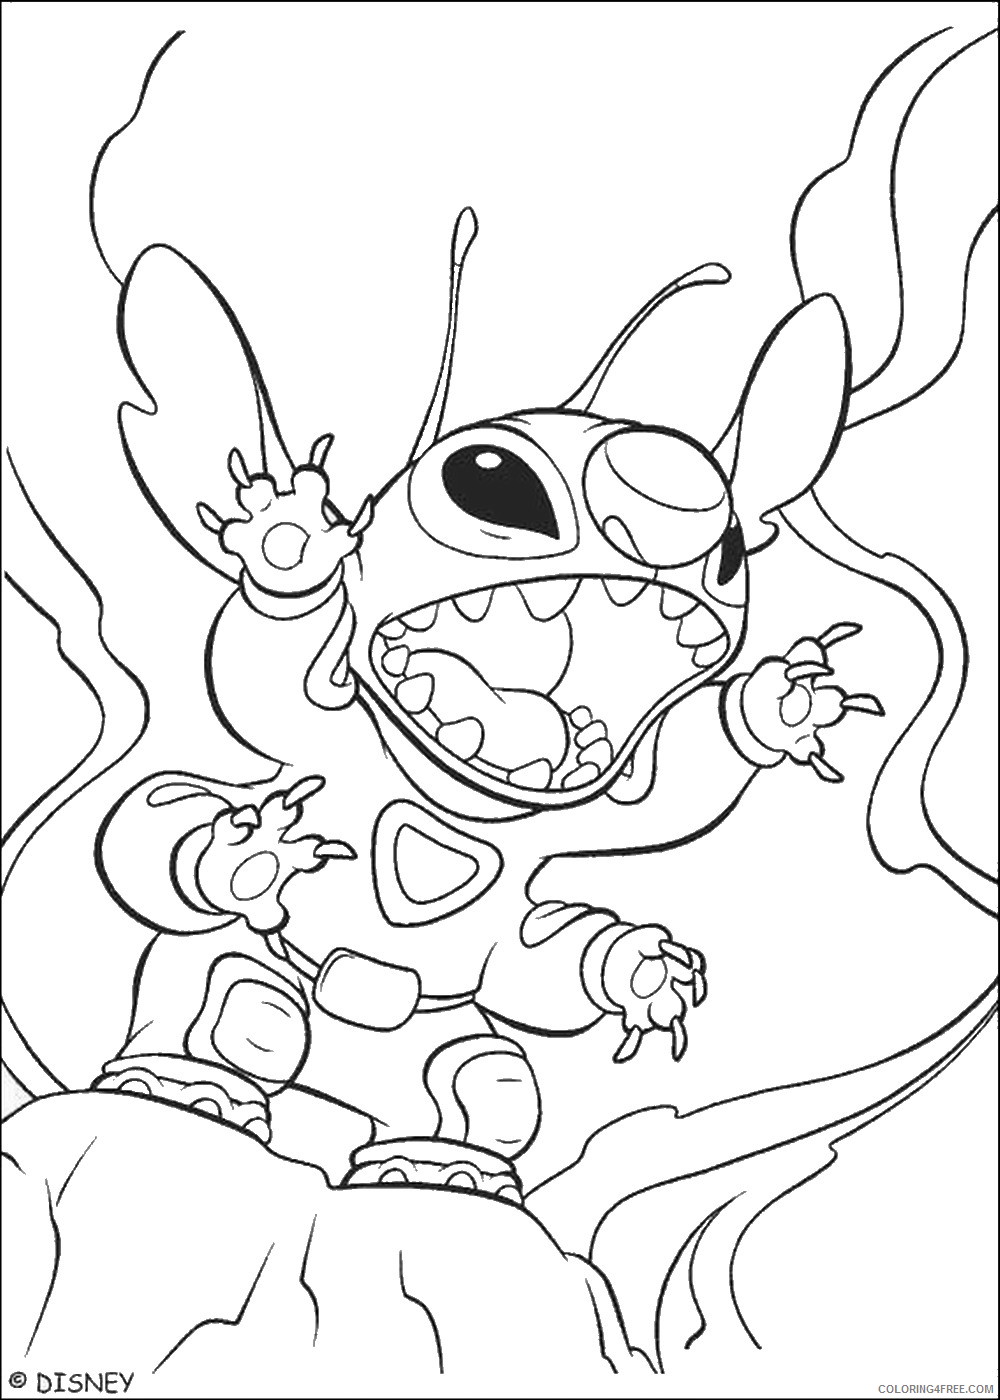 Lilo and Stitch Coloring Pages Cartoons lilo_and_stitch_cl_17 Printable 2020 3799 Coloring4free